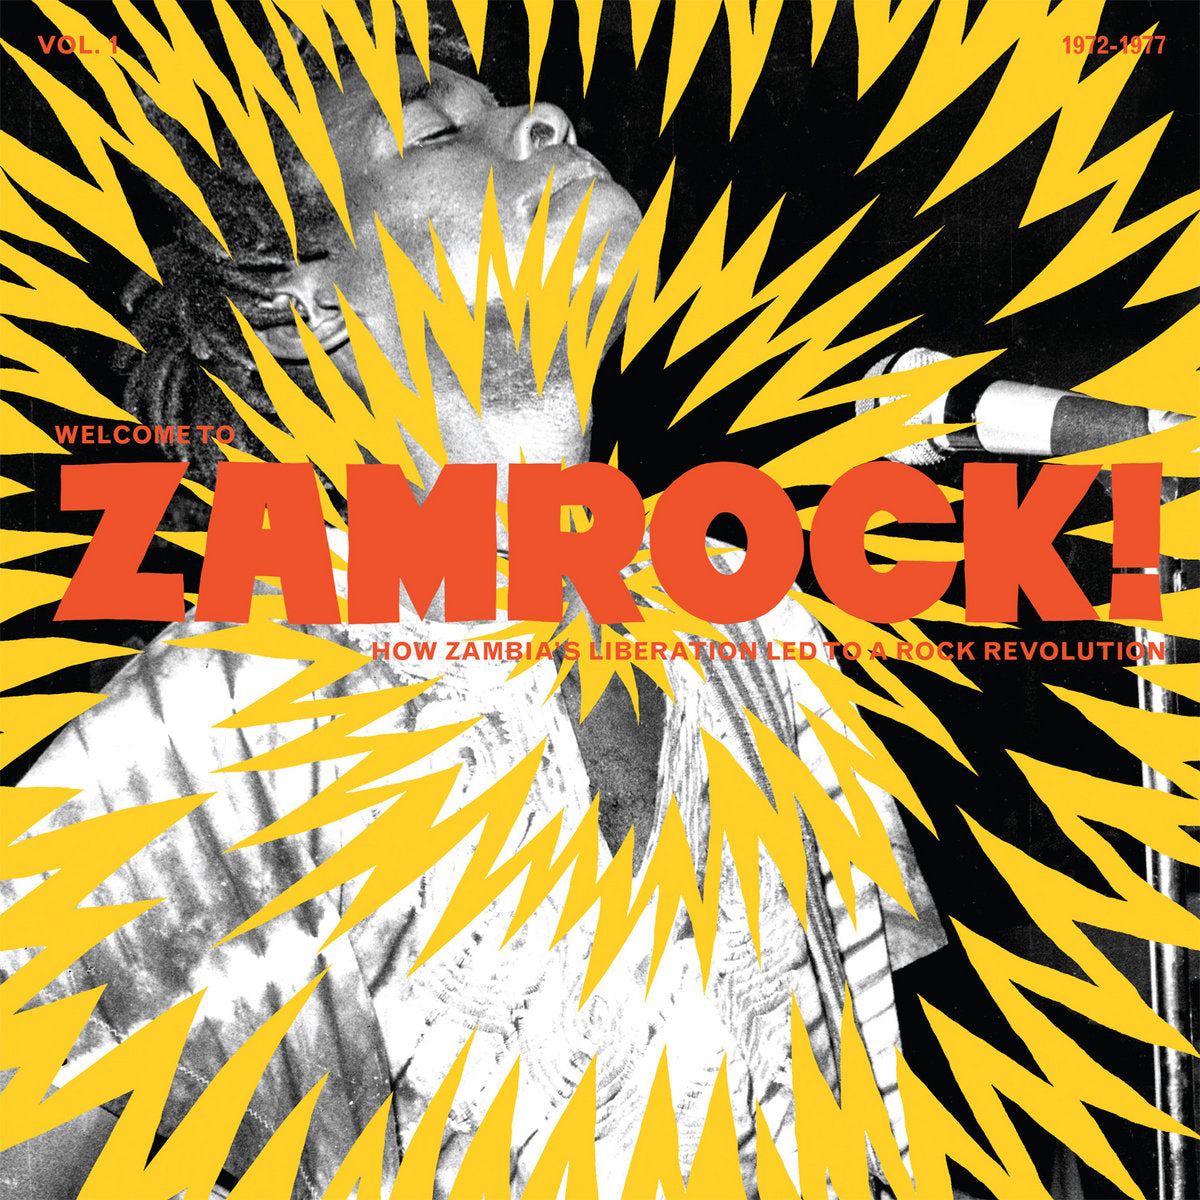 Welcome To Zamrock! How Zambia’s Liberation Led To a Rock Revolution, Vol. 1 (1972-1977) (New 2LP)